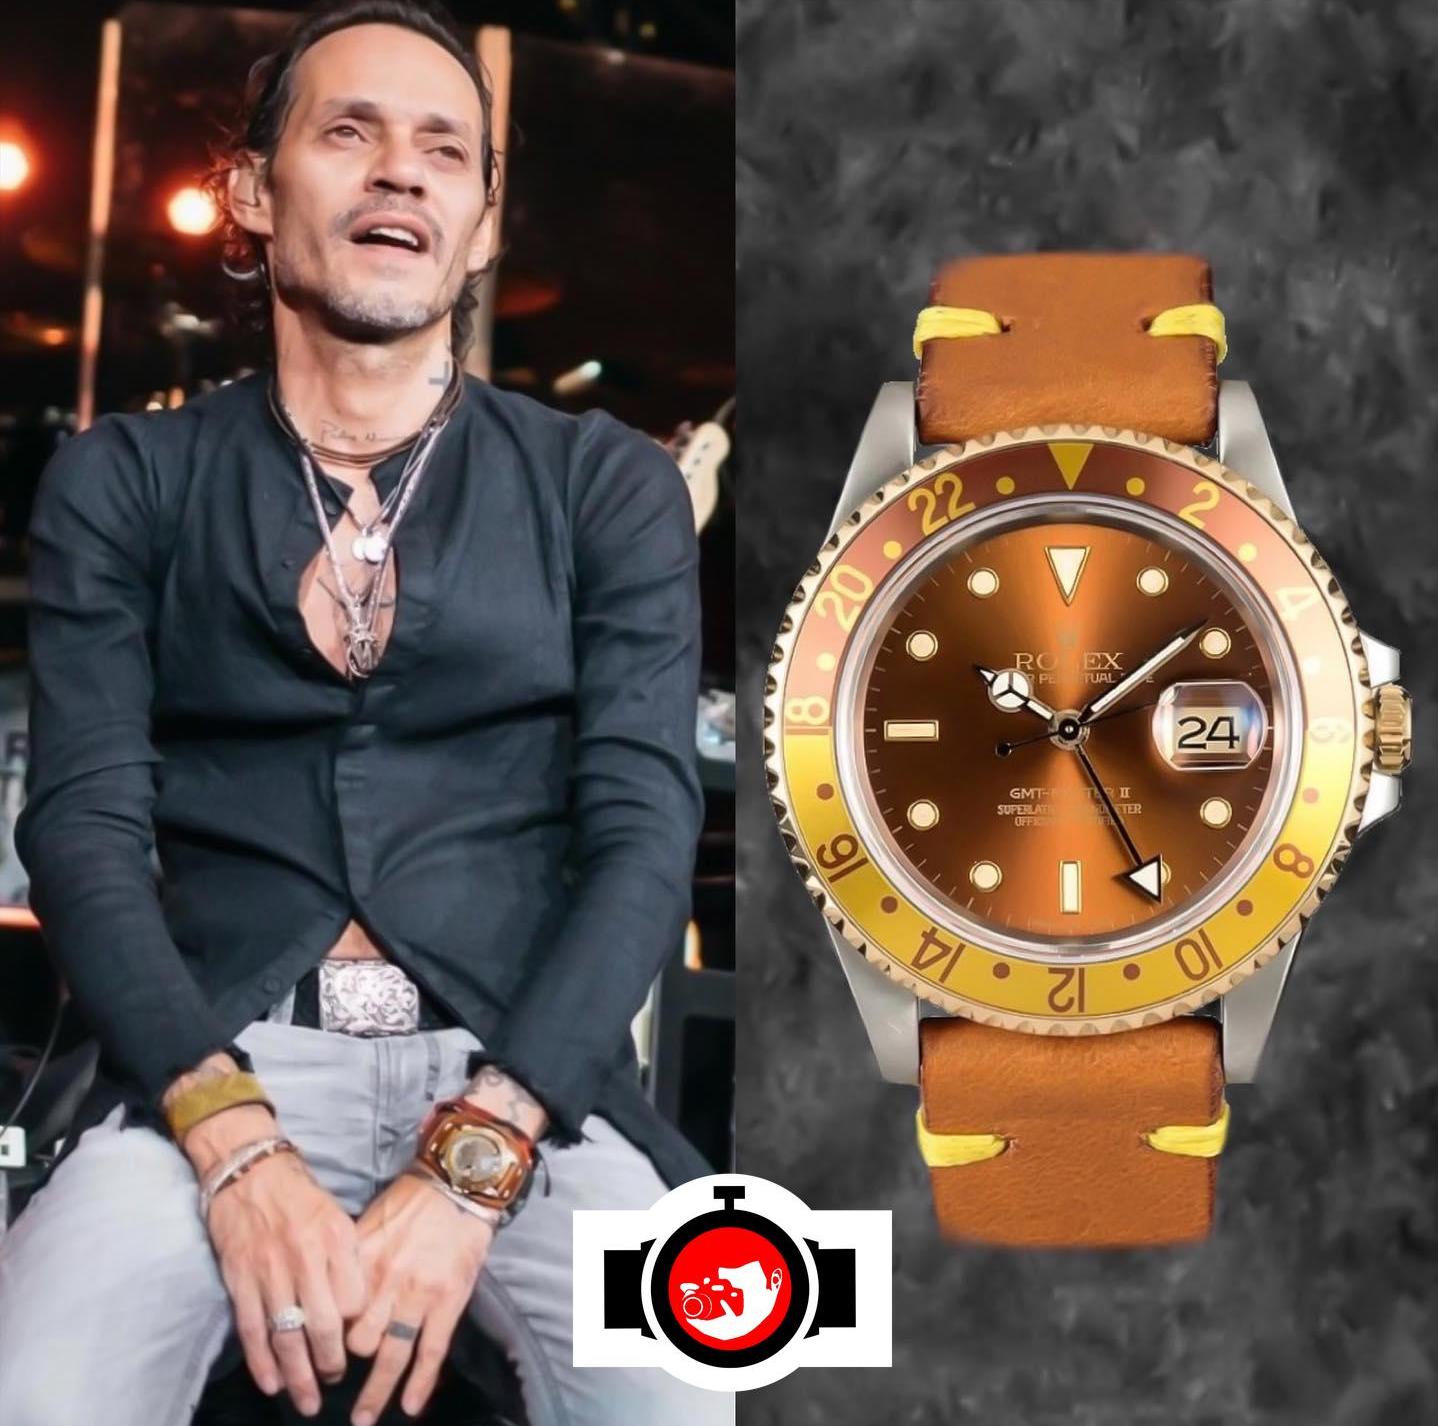 singer Marc Anthony spotted wearing a Rolex 16713